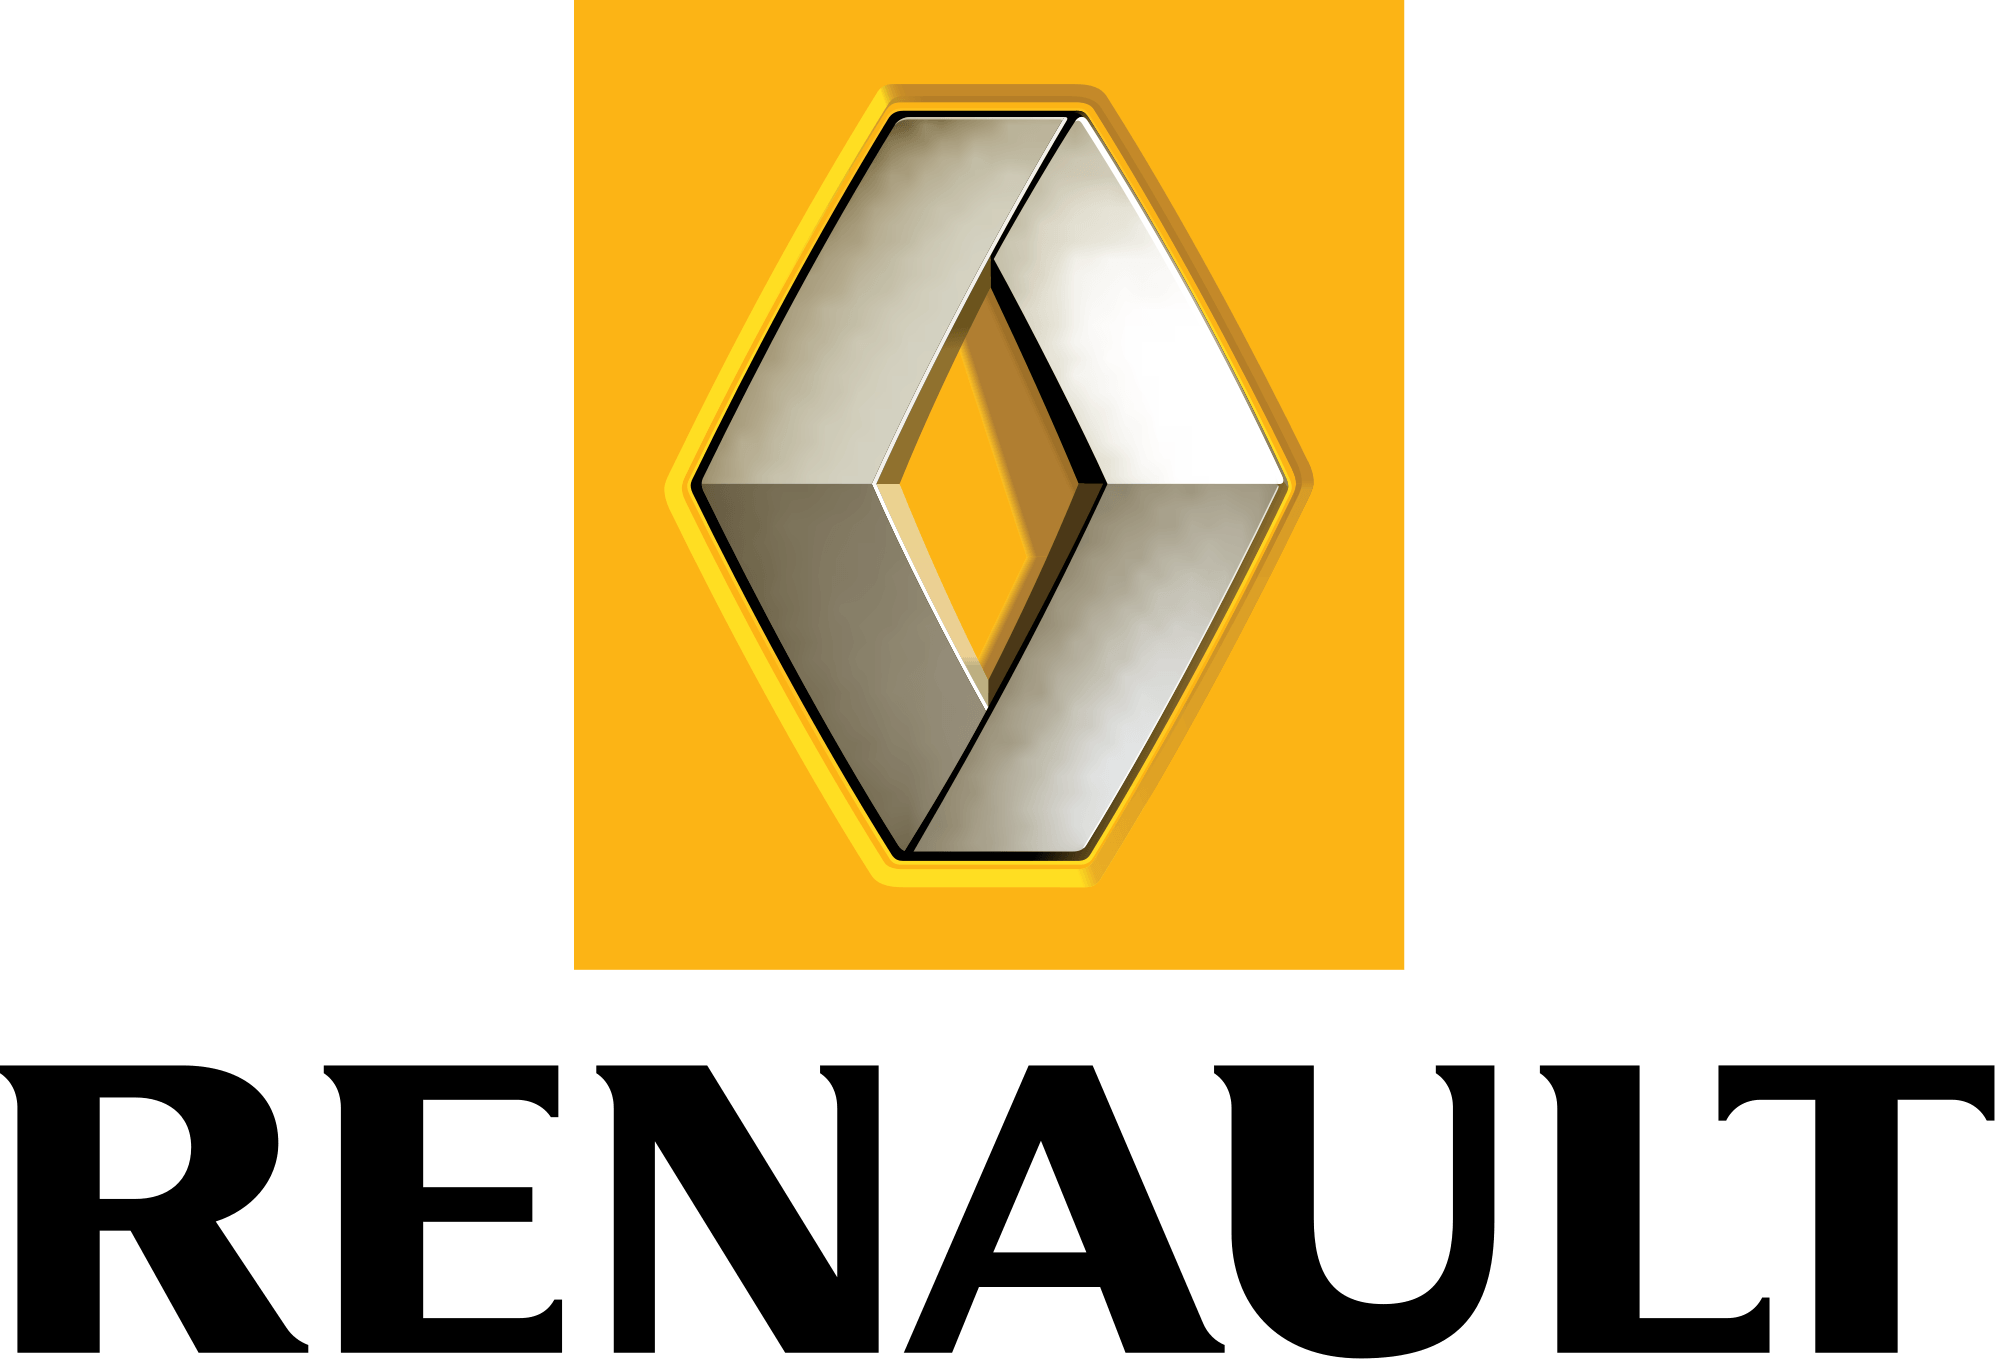 Silver Diamond Logo - Renault Logo, Renault Car Symbol Meaning and History | Car Brand ...